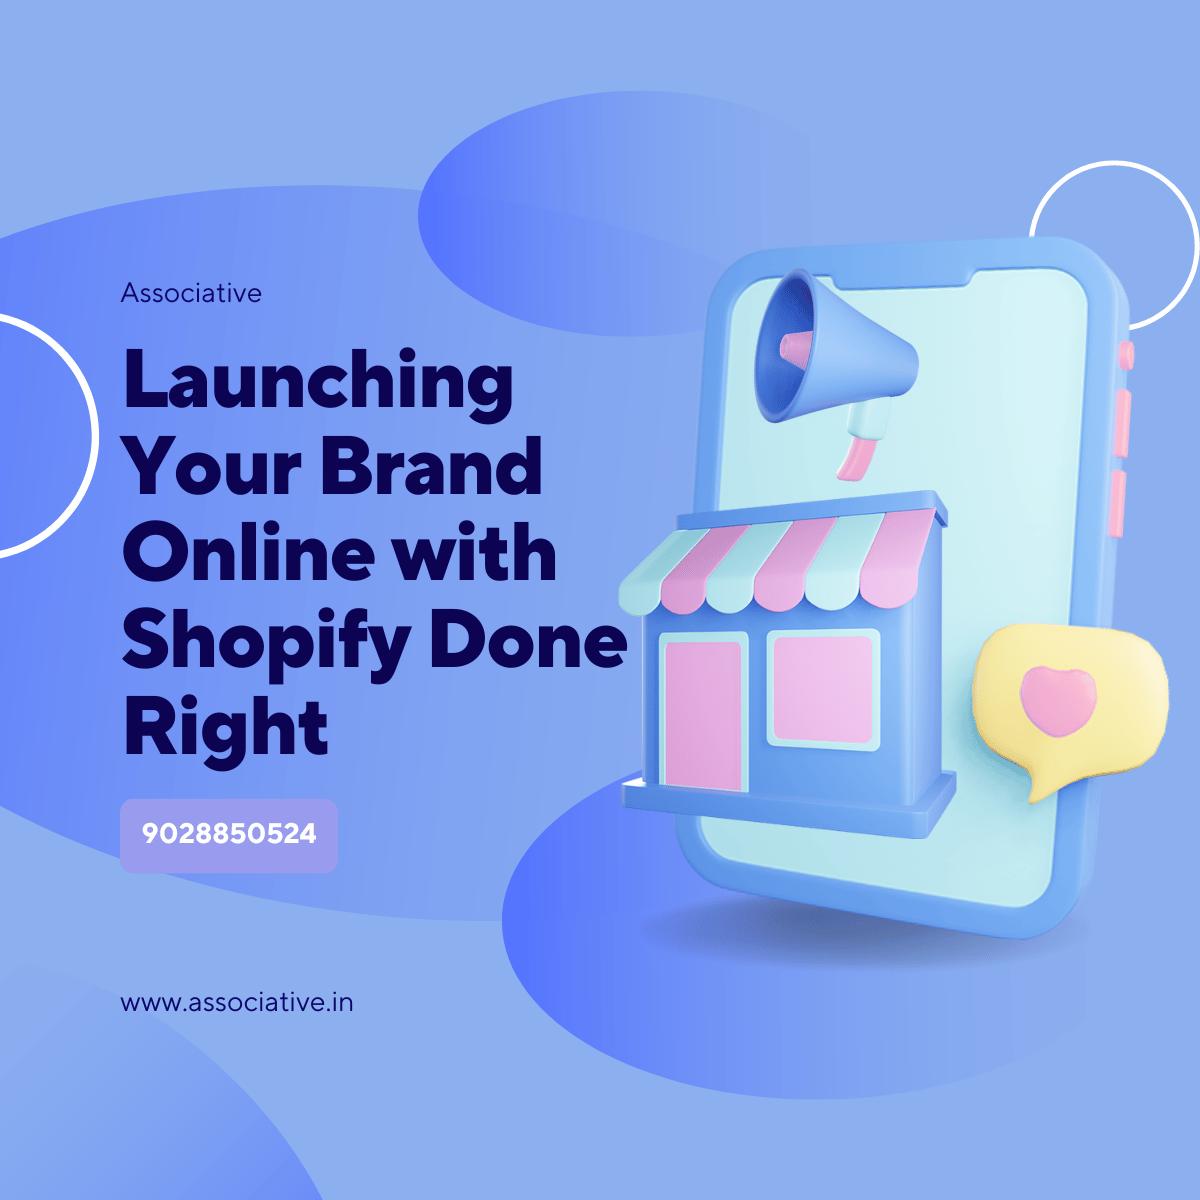 Pune Powerhouse: Launching Your Brand Online with Shopify Done Right